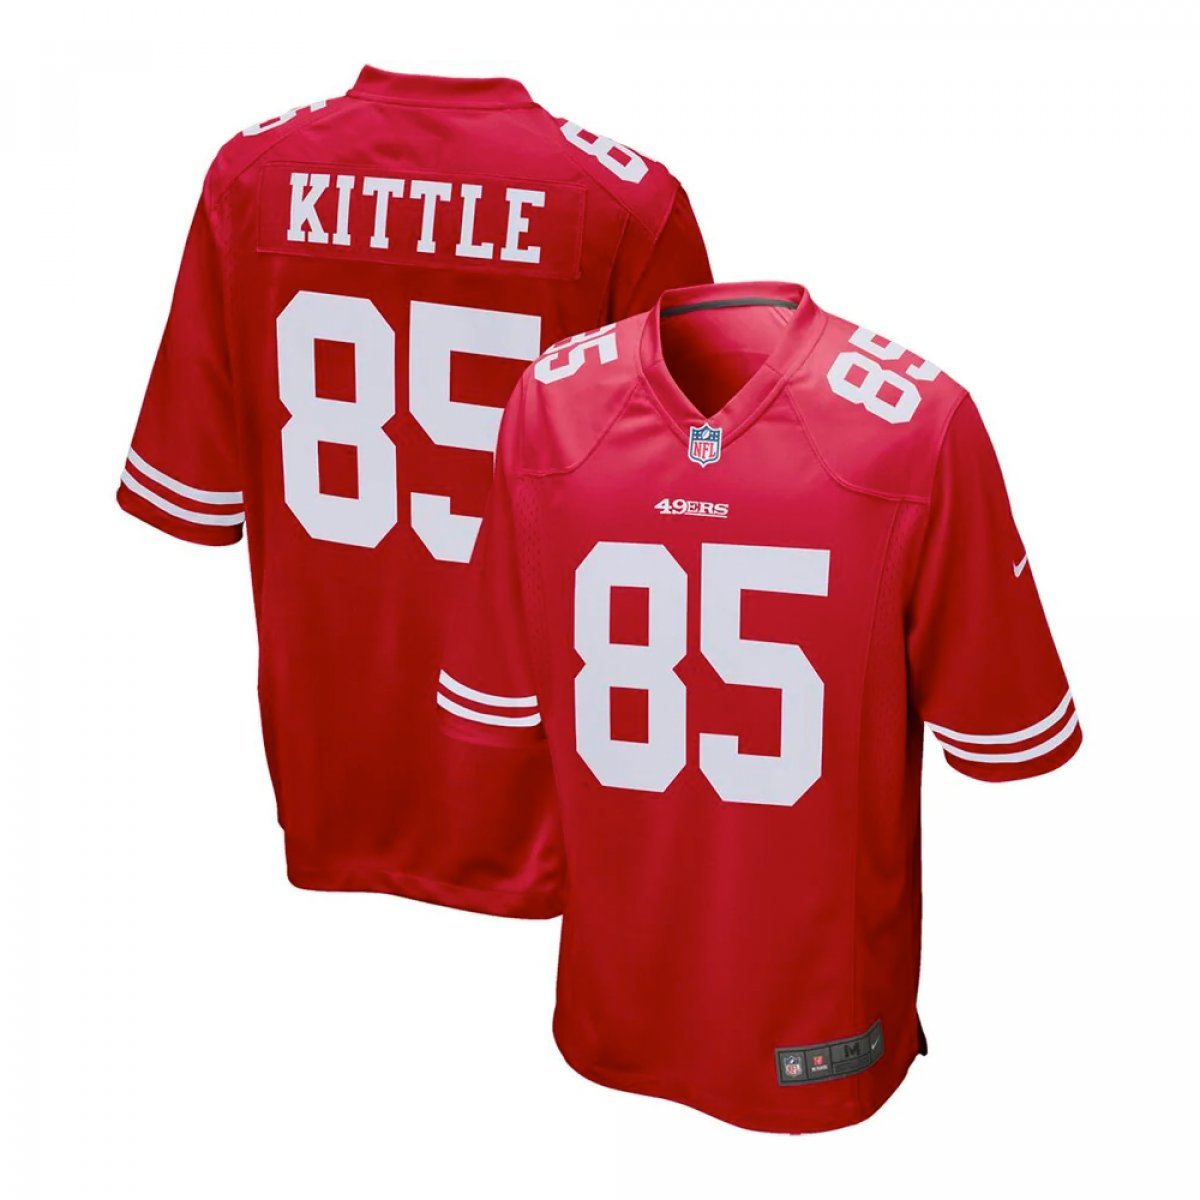 JERSEY GAME 49ERS KITTLE TC ADULTO